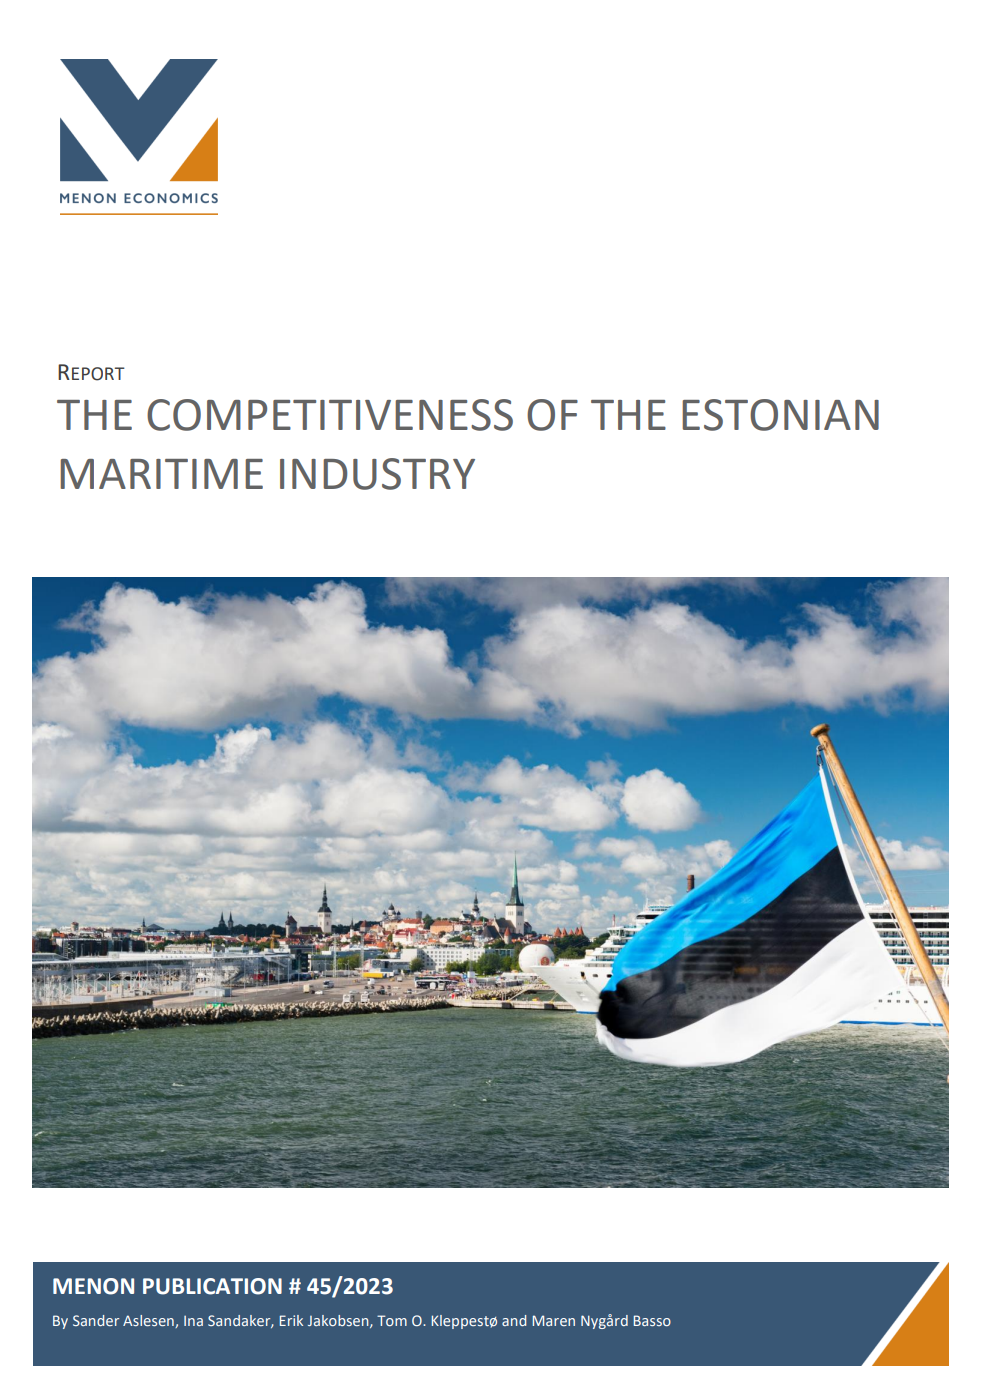 The competitiveness of the Estonian maritime industry